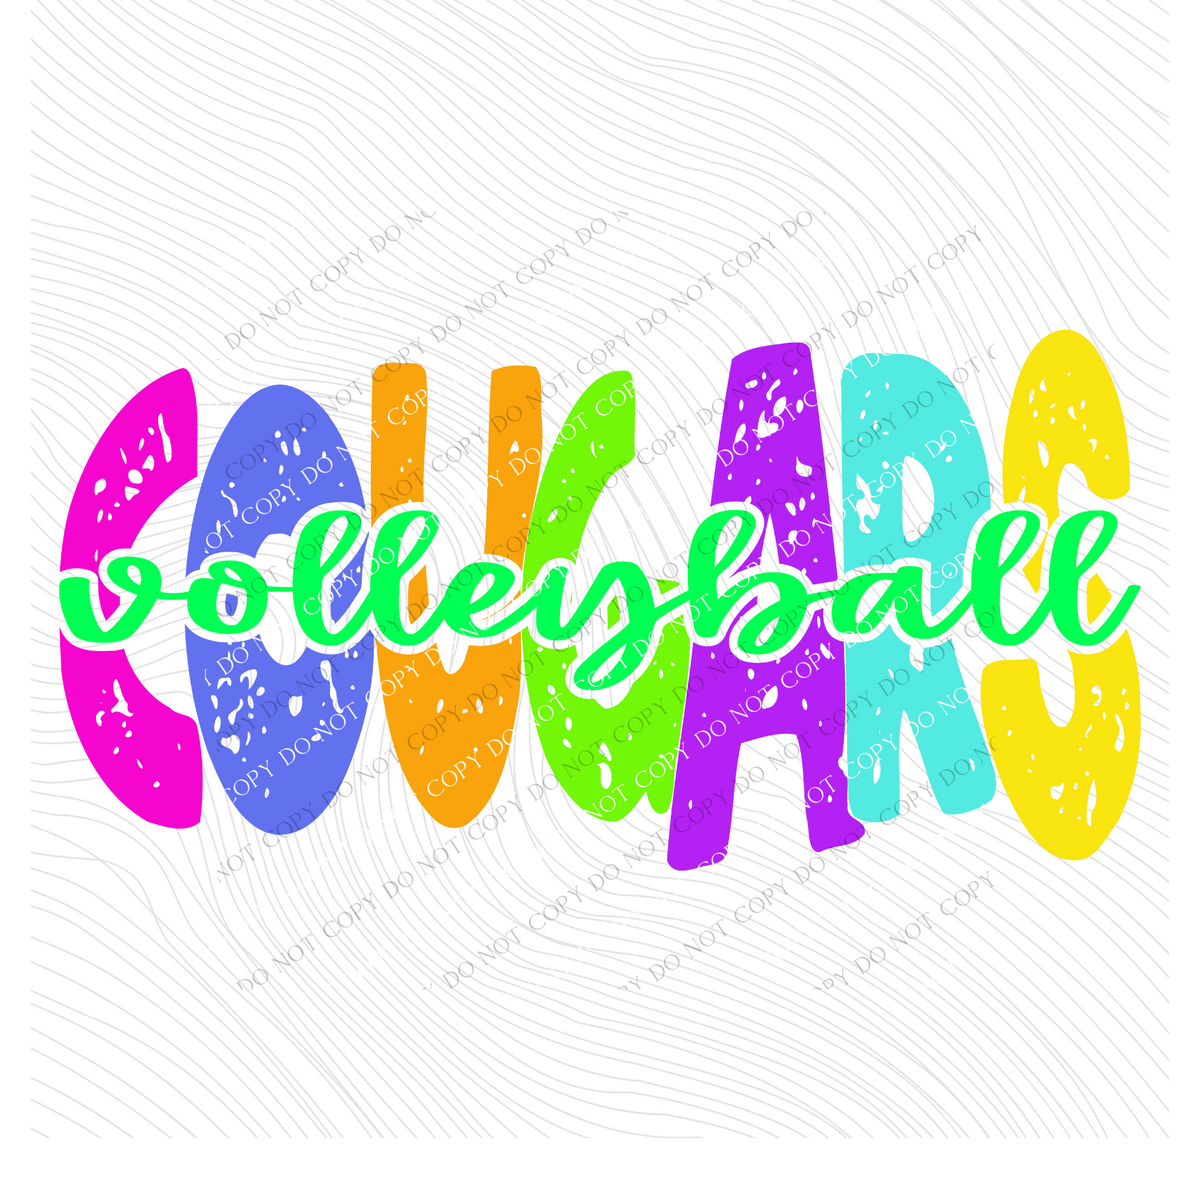 Cougars Distressed Blank, Cutout Softball, Baseball & Volleyball in Neons all Included Digital Design, PNG